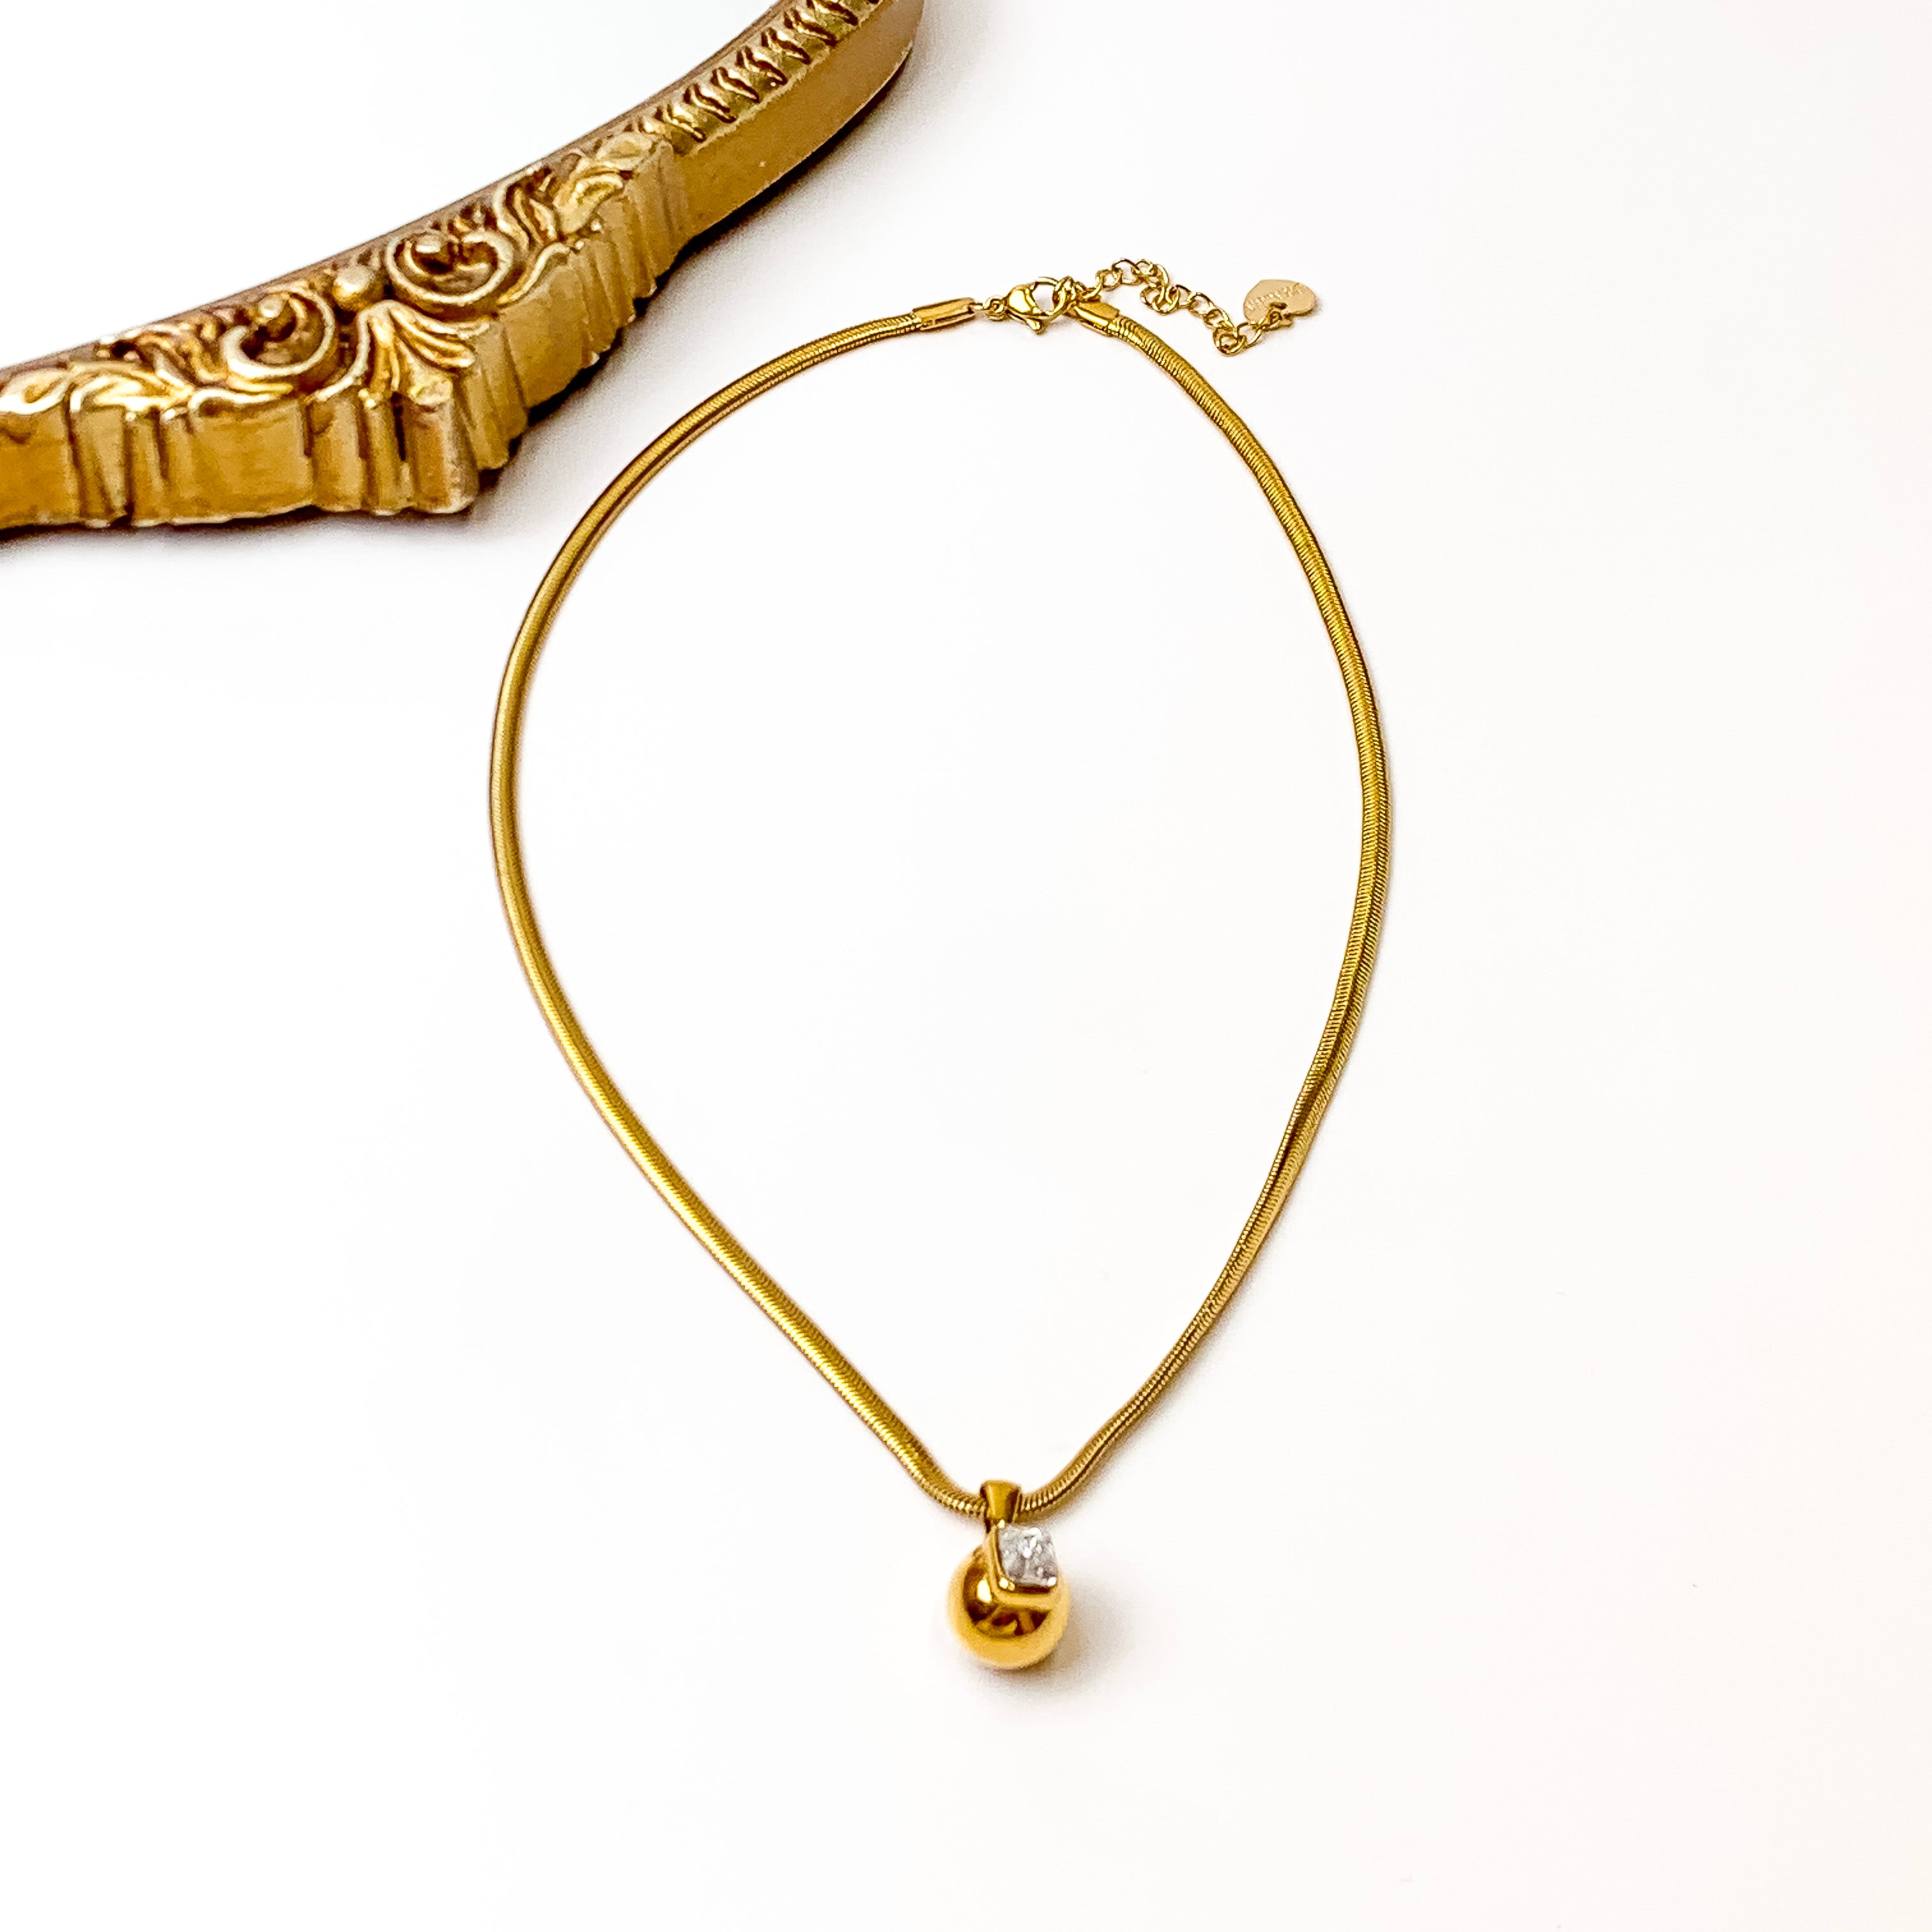 Bracha | Aldi Necklace in Gold Tone - Giddy Up Glamour Boutique